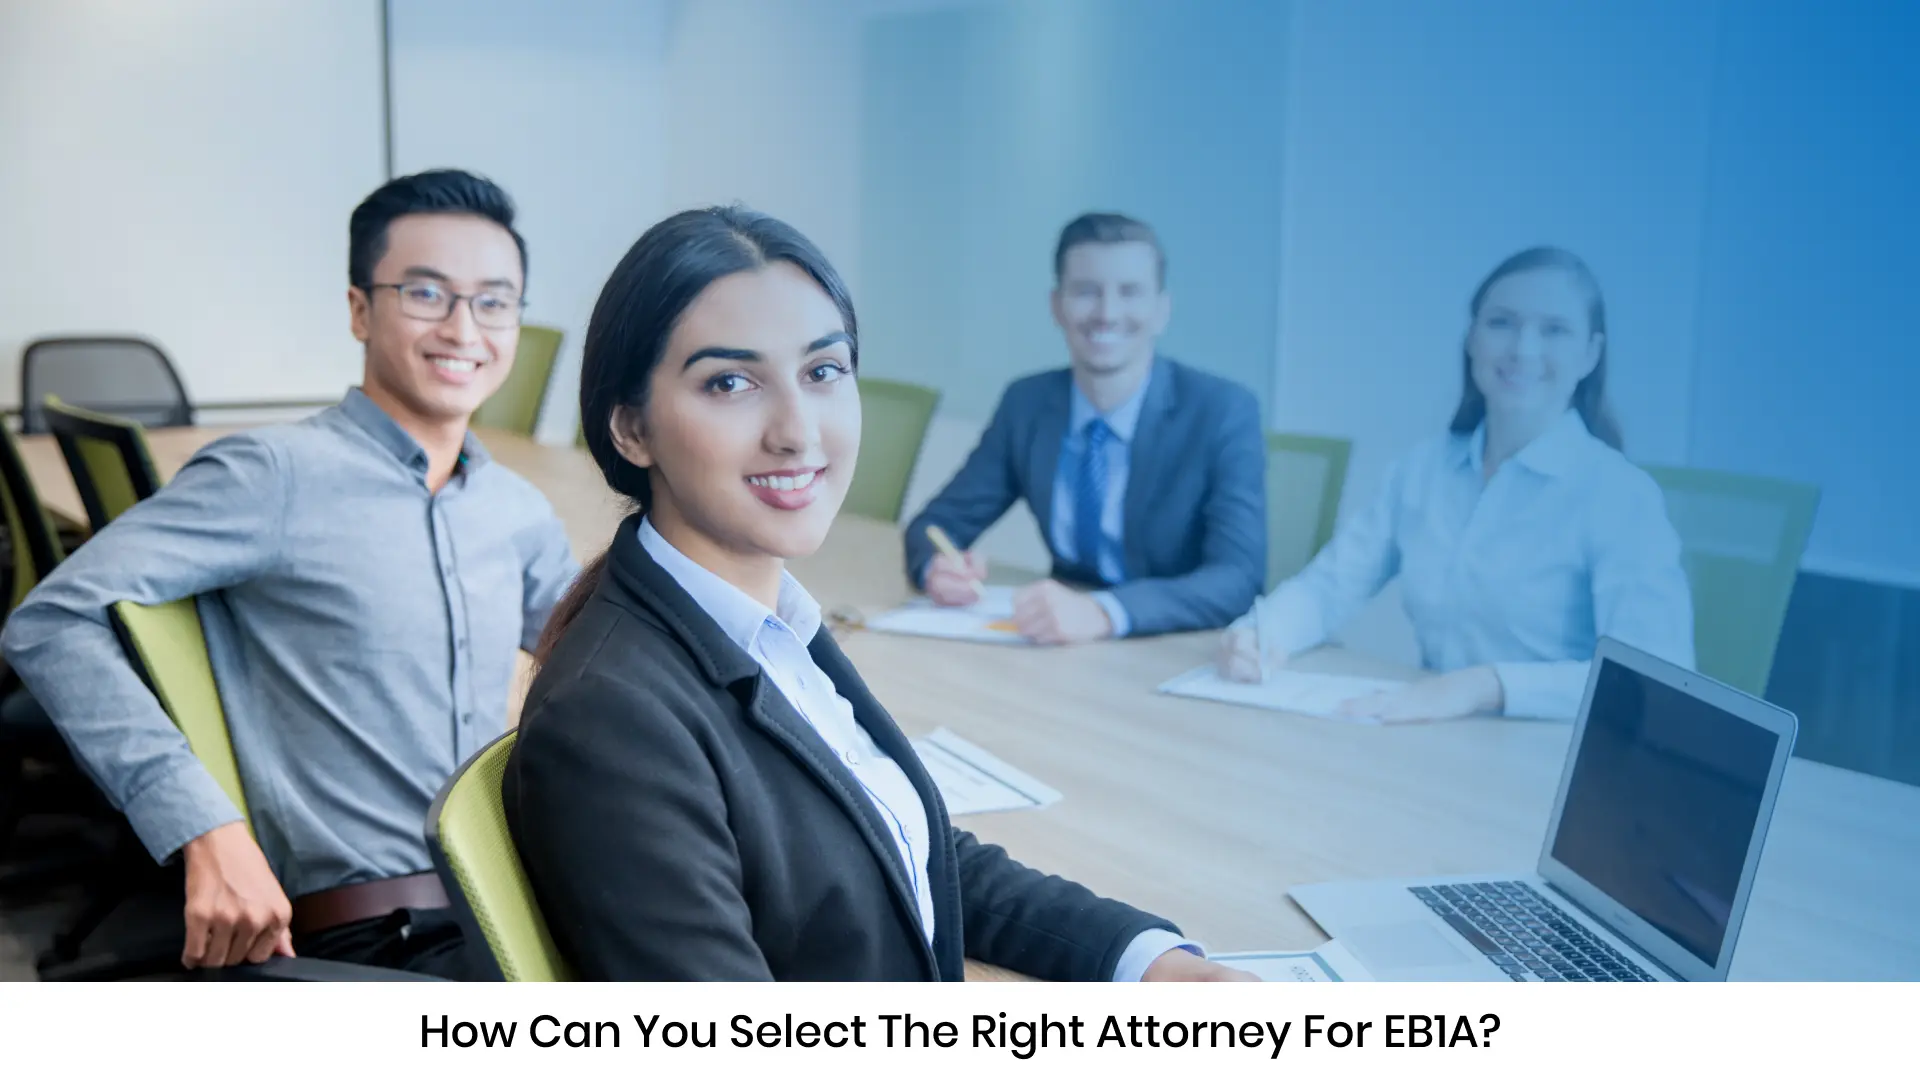 How Can You Select the Right Attorney for EB1A?